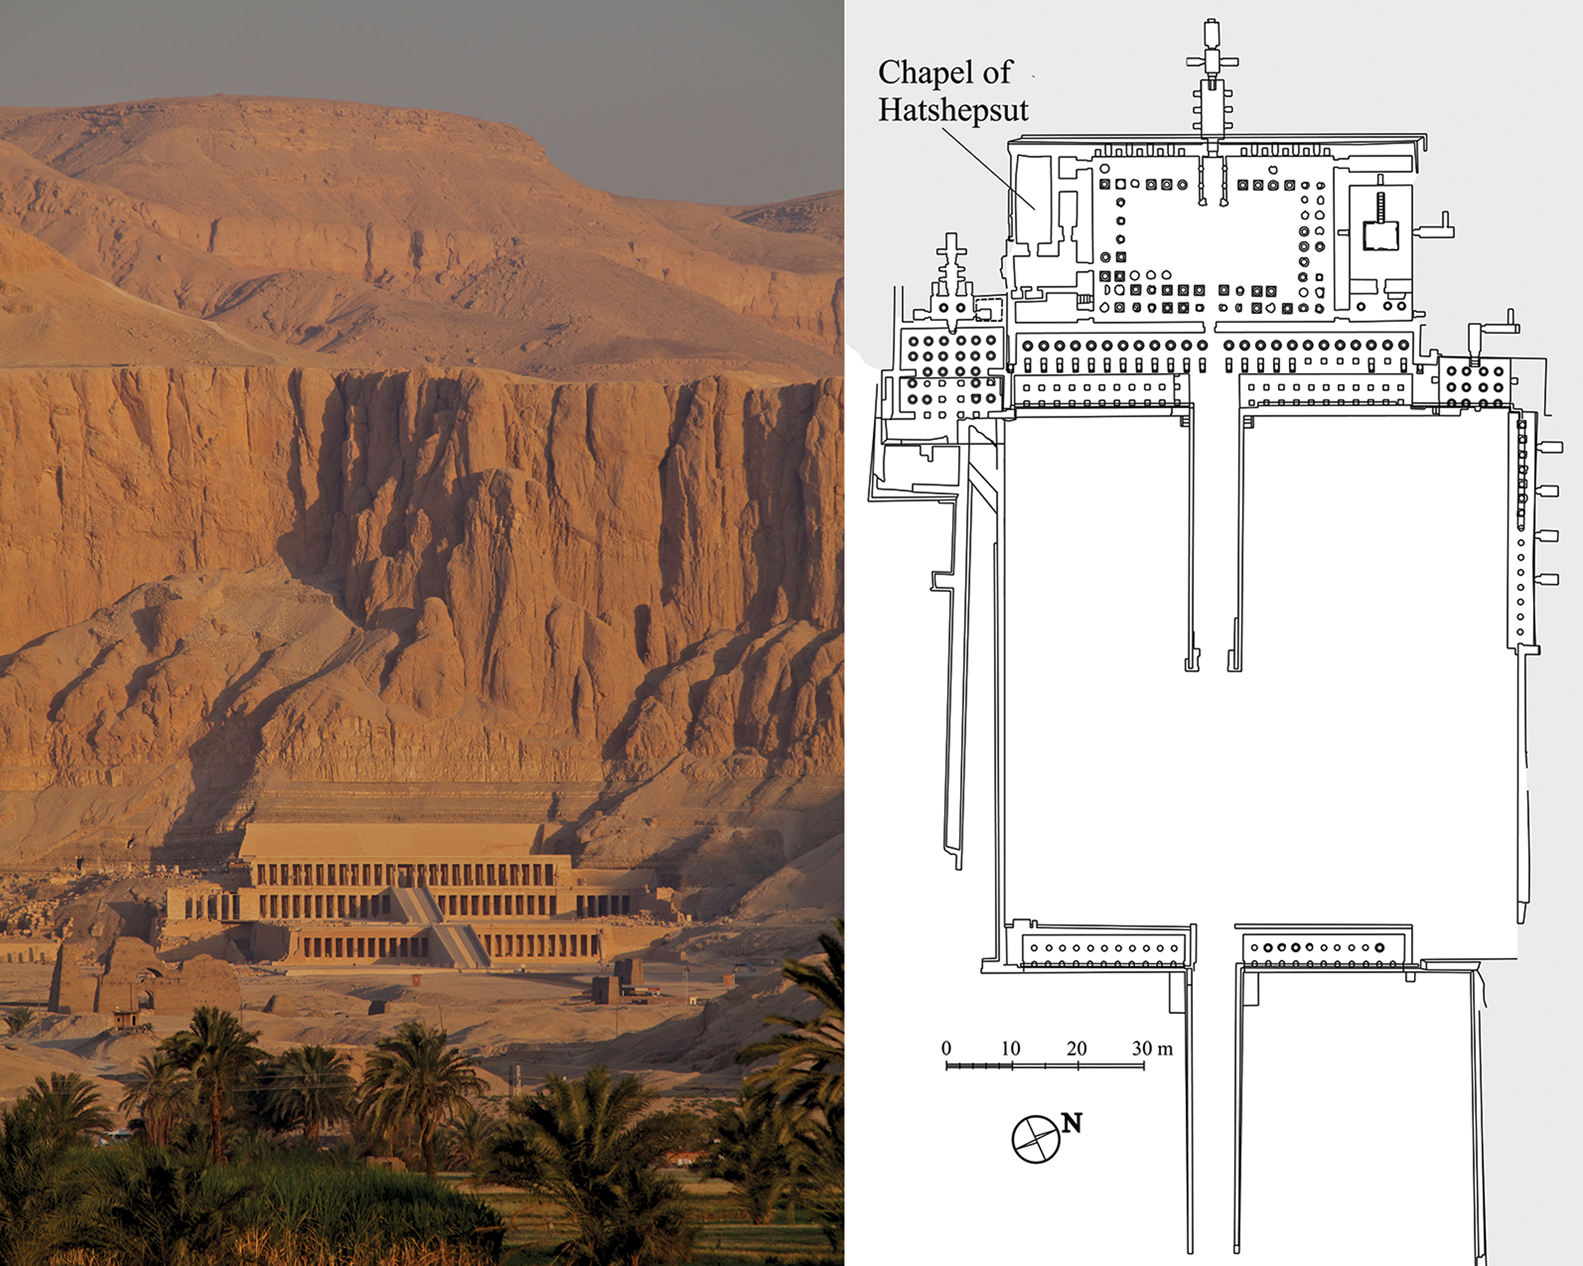 General view and plan of the Hatshepsut temple. On the third terrace on the left - the premises of the queen's chapel. Credit: Anastasiia Stupko-Lubczynska / Antiquity, 2021